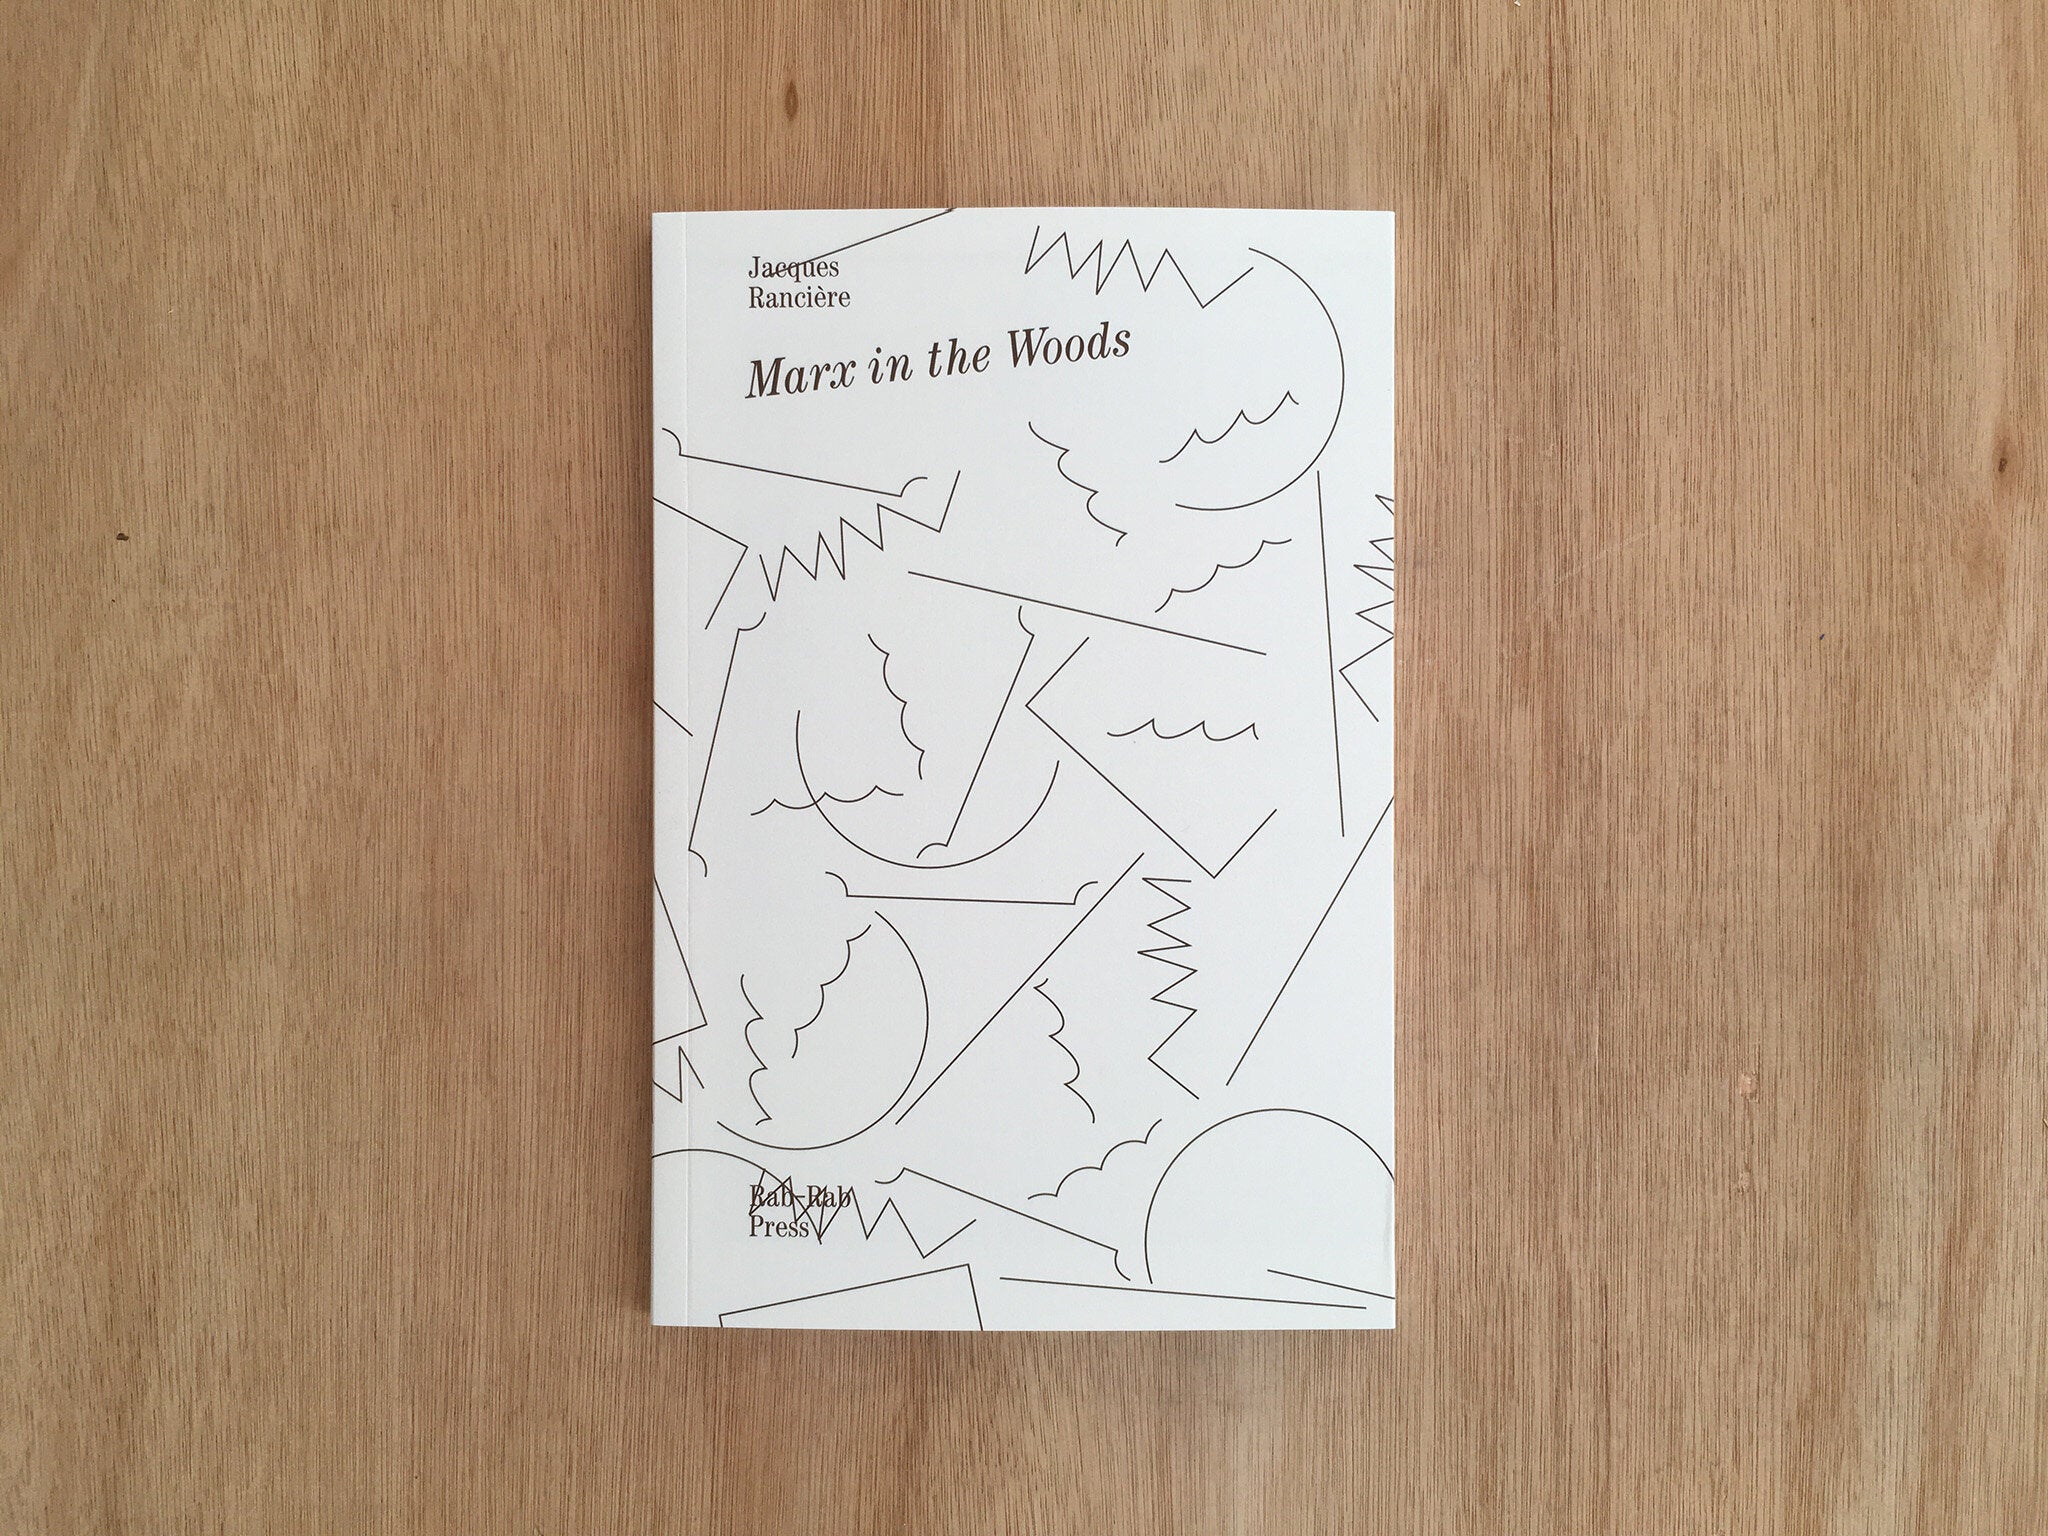 MARX IN THE WOODS by Jacques Rancière